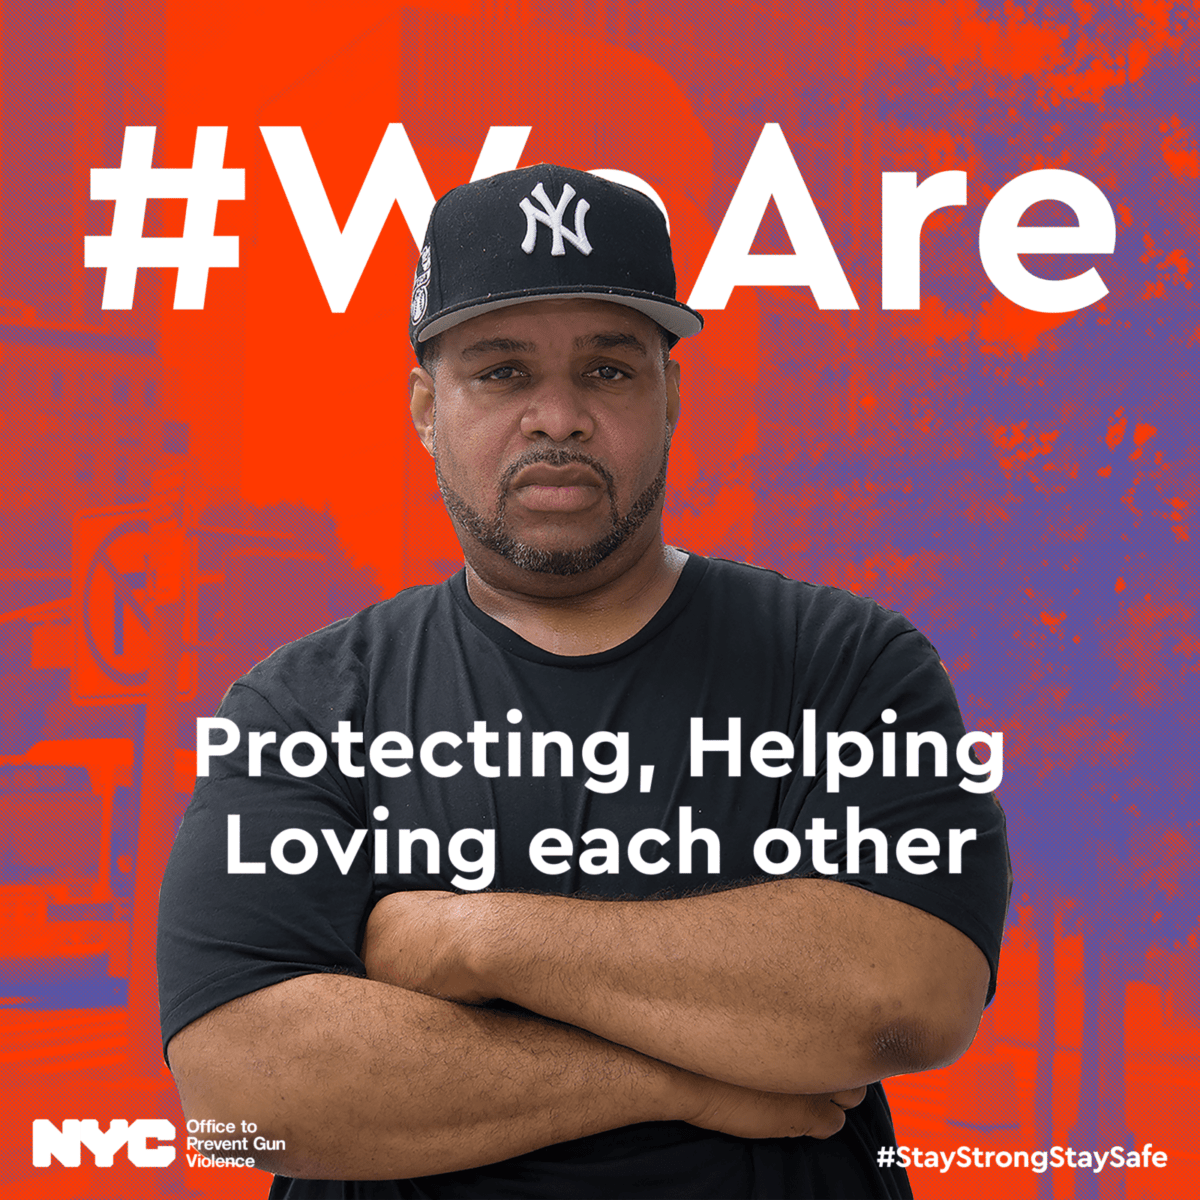 #WeAre Protecting, Helping, Loving each other